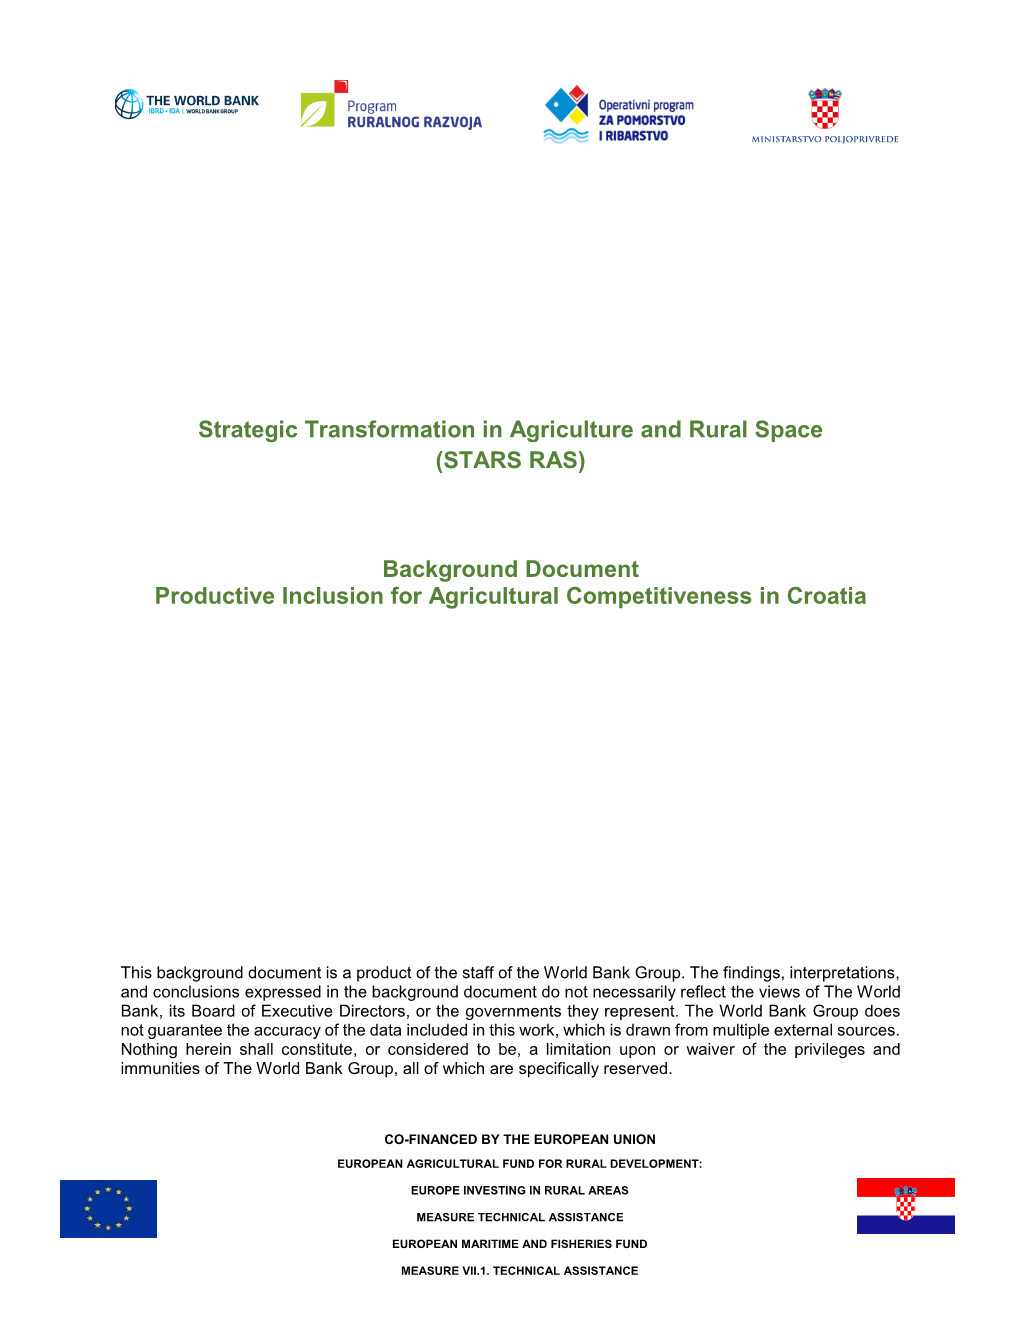 Strategic Transformation in Agriculture and Rural Space (STARS RAS)